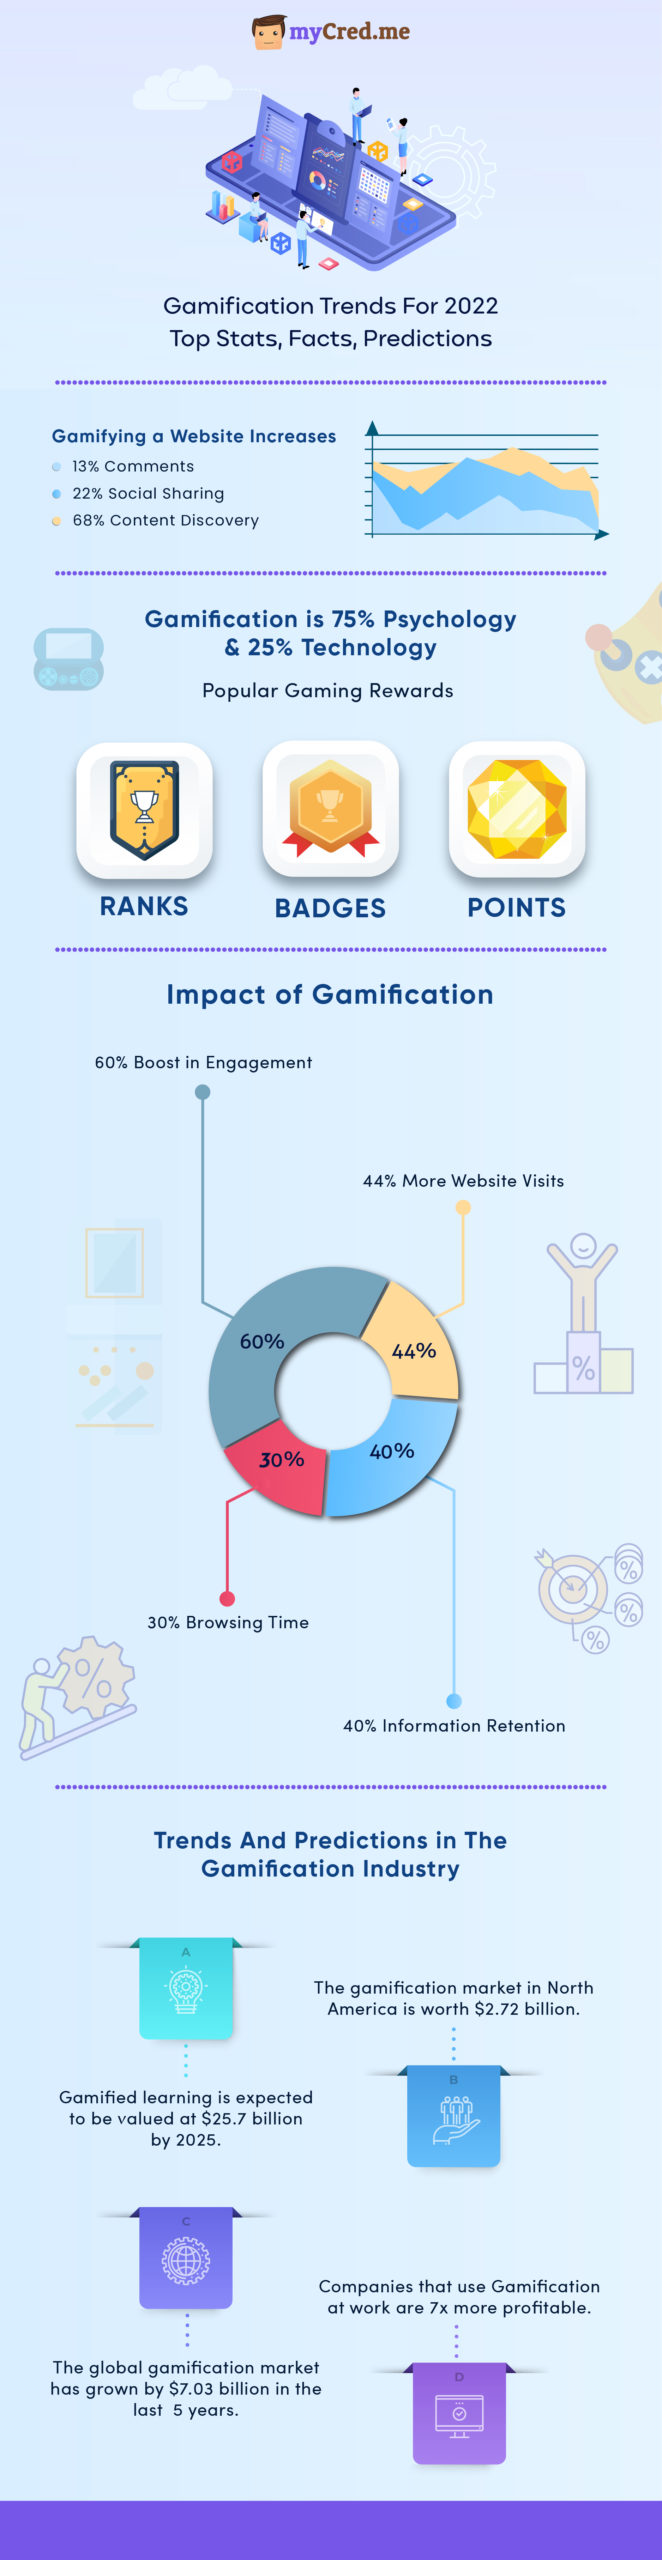 Gamification Stats to Know in 2022